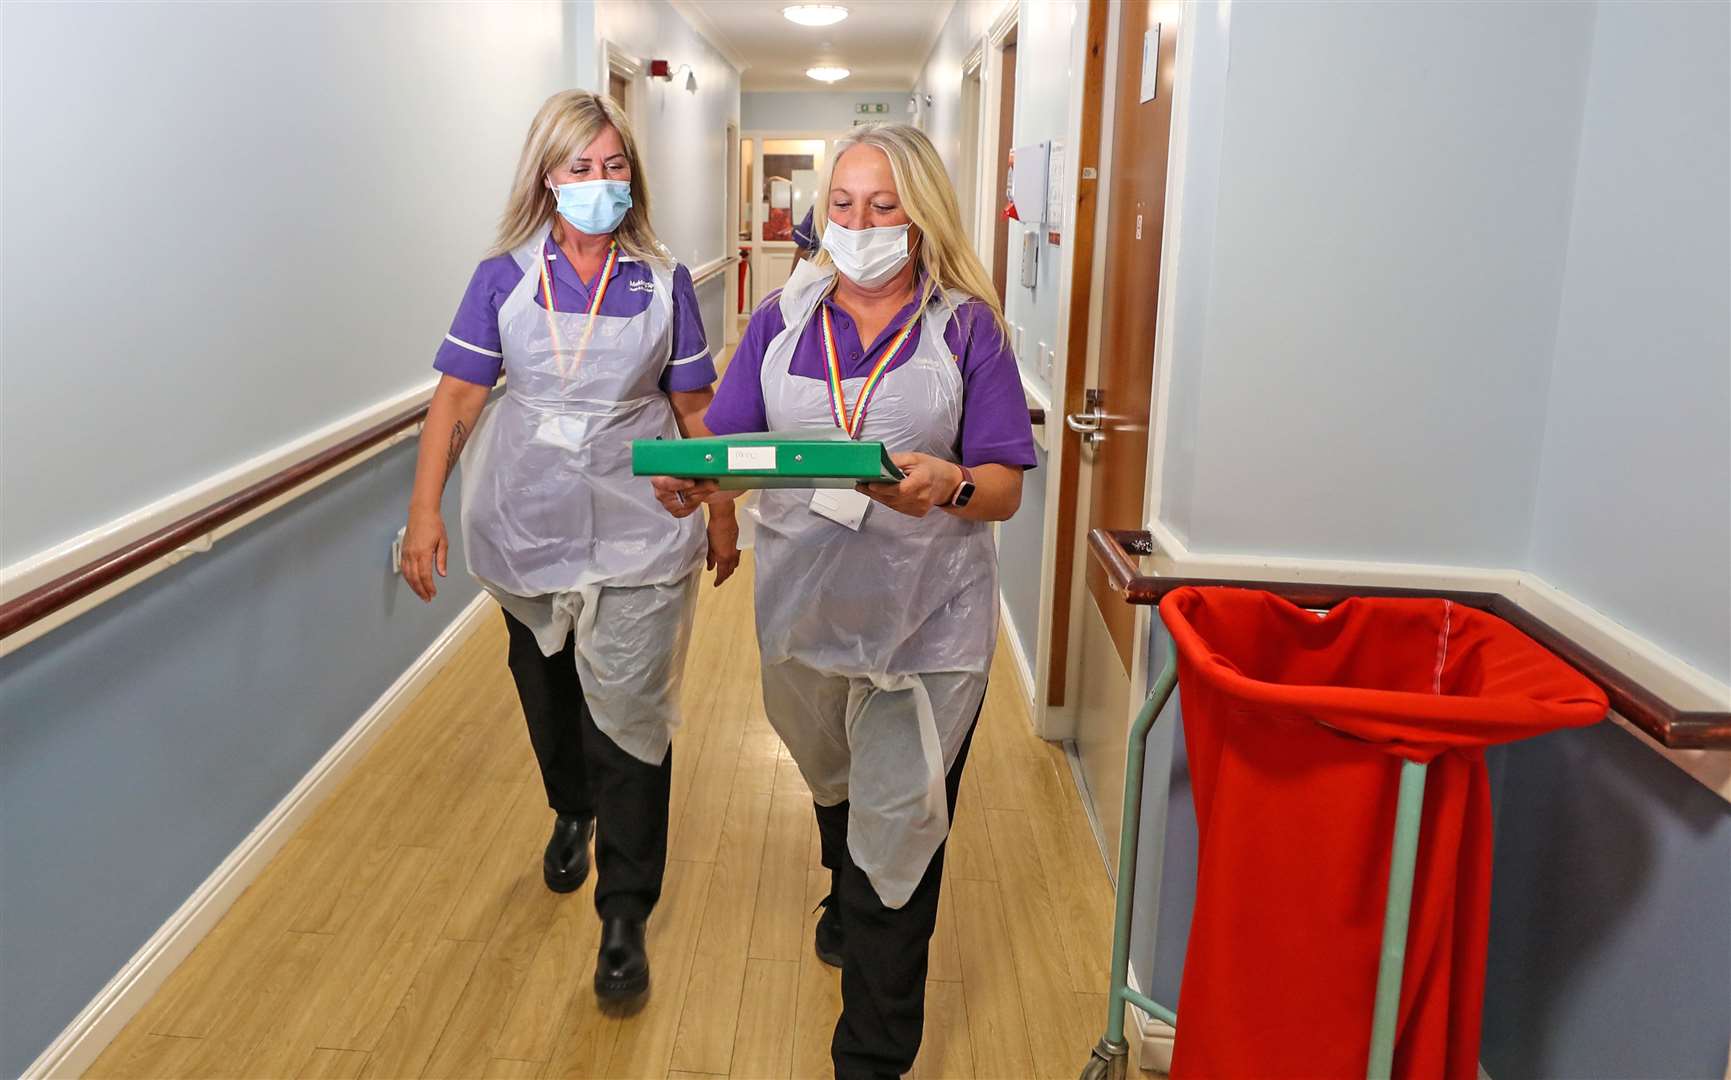 The committee said the recruitment of care workers has been impacted by the pandemic (PA)